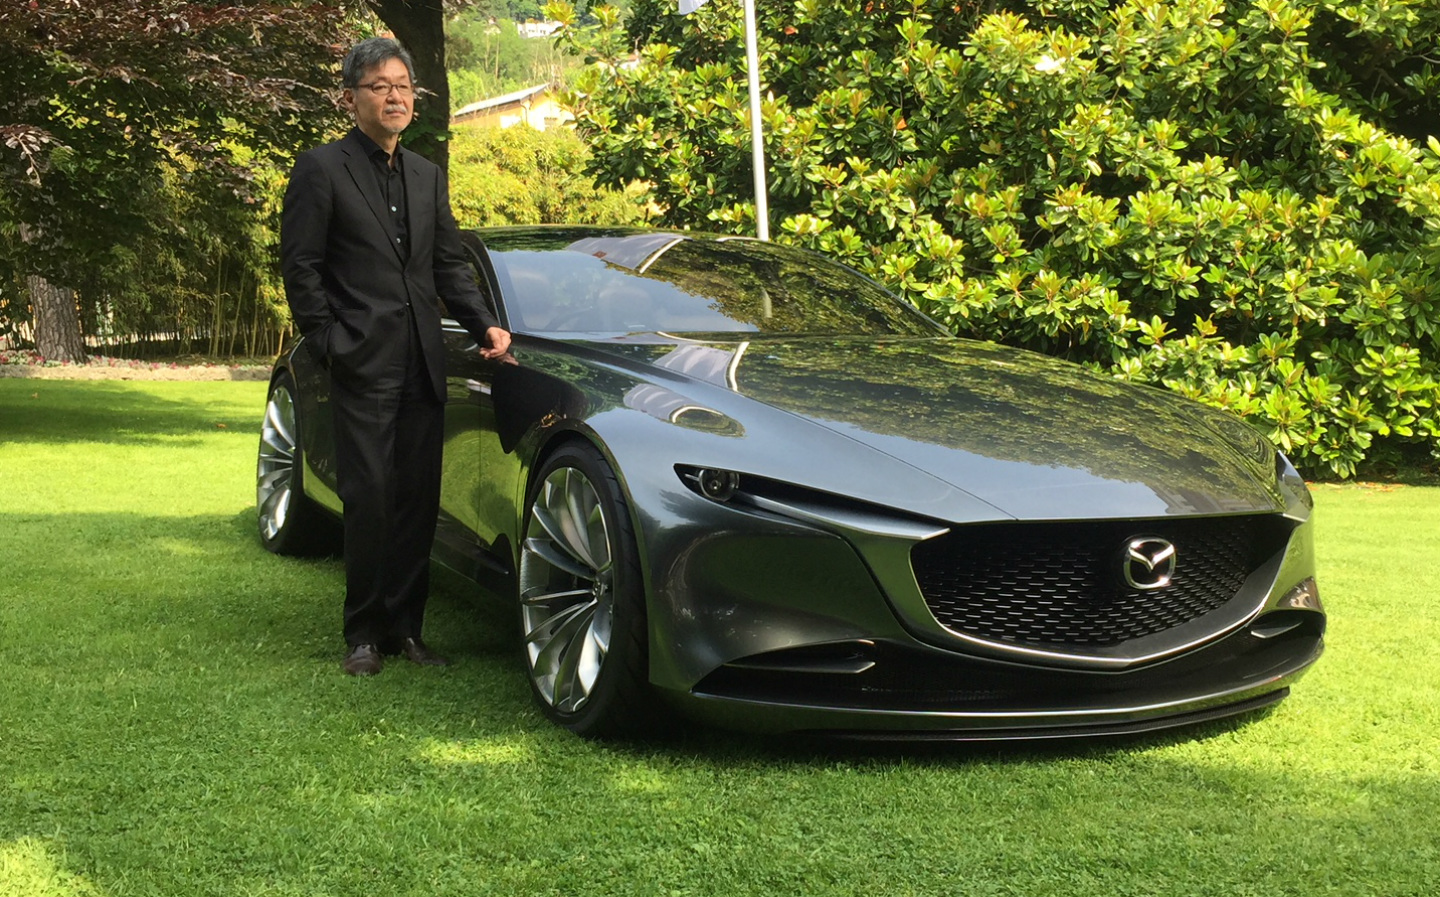 Why a new RX-7 sports car is a dream for Mazda's design boss Ikuo Maeda